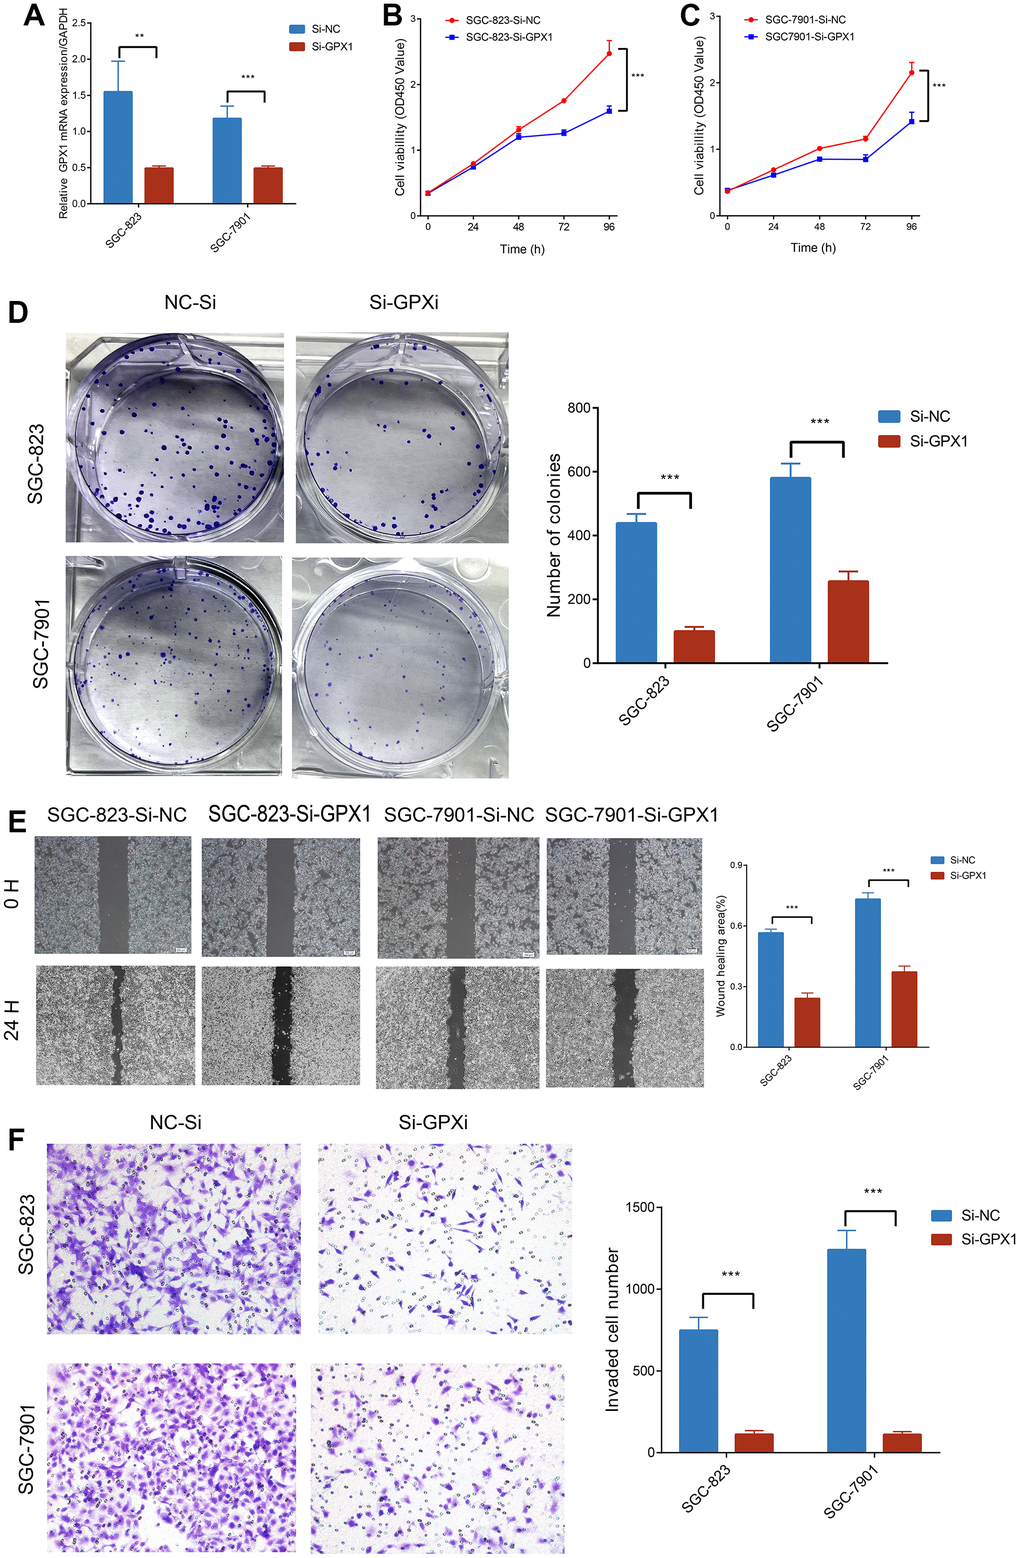 The impact of GPX1 on the migration, invasion, and proliferation of gastric cancer cells. (A) Relative expression of GPX1 detected by qPCR in SGC-823 and SGC-7901 cells (n=3). Cell viability of (B) SGC-823 and (C) SGC-7901 cells after being treated with Si-NC and Si-GPX1 (n=3). (D) Clone formation experiments (n=3). (E) Scratch assays. (n=3) (×40). (F) The numbers of SGC-823 and SGC-7901 cells that traversed the transwell membrane (n=3) (×200).